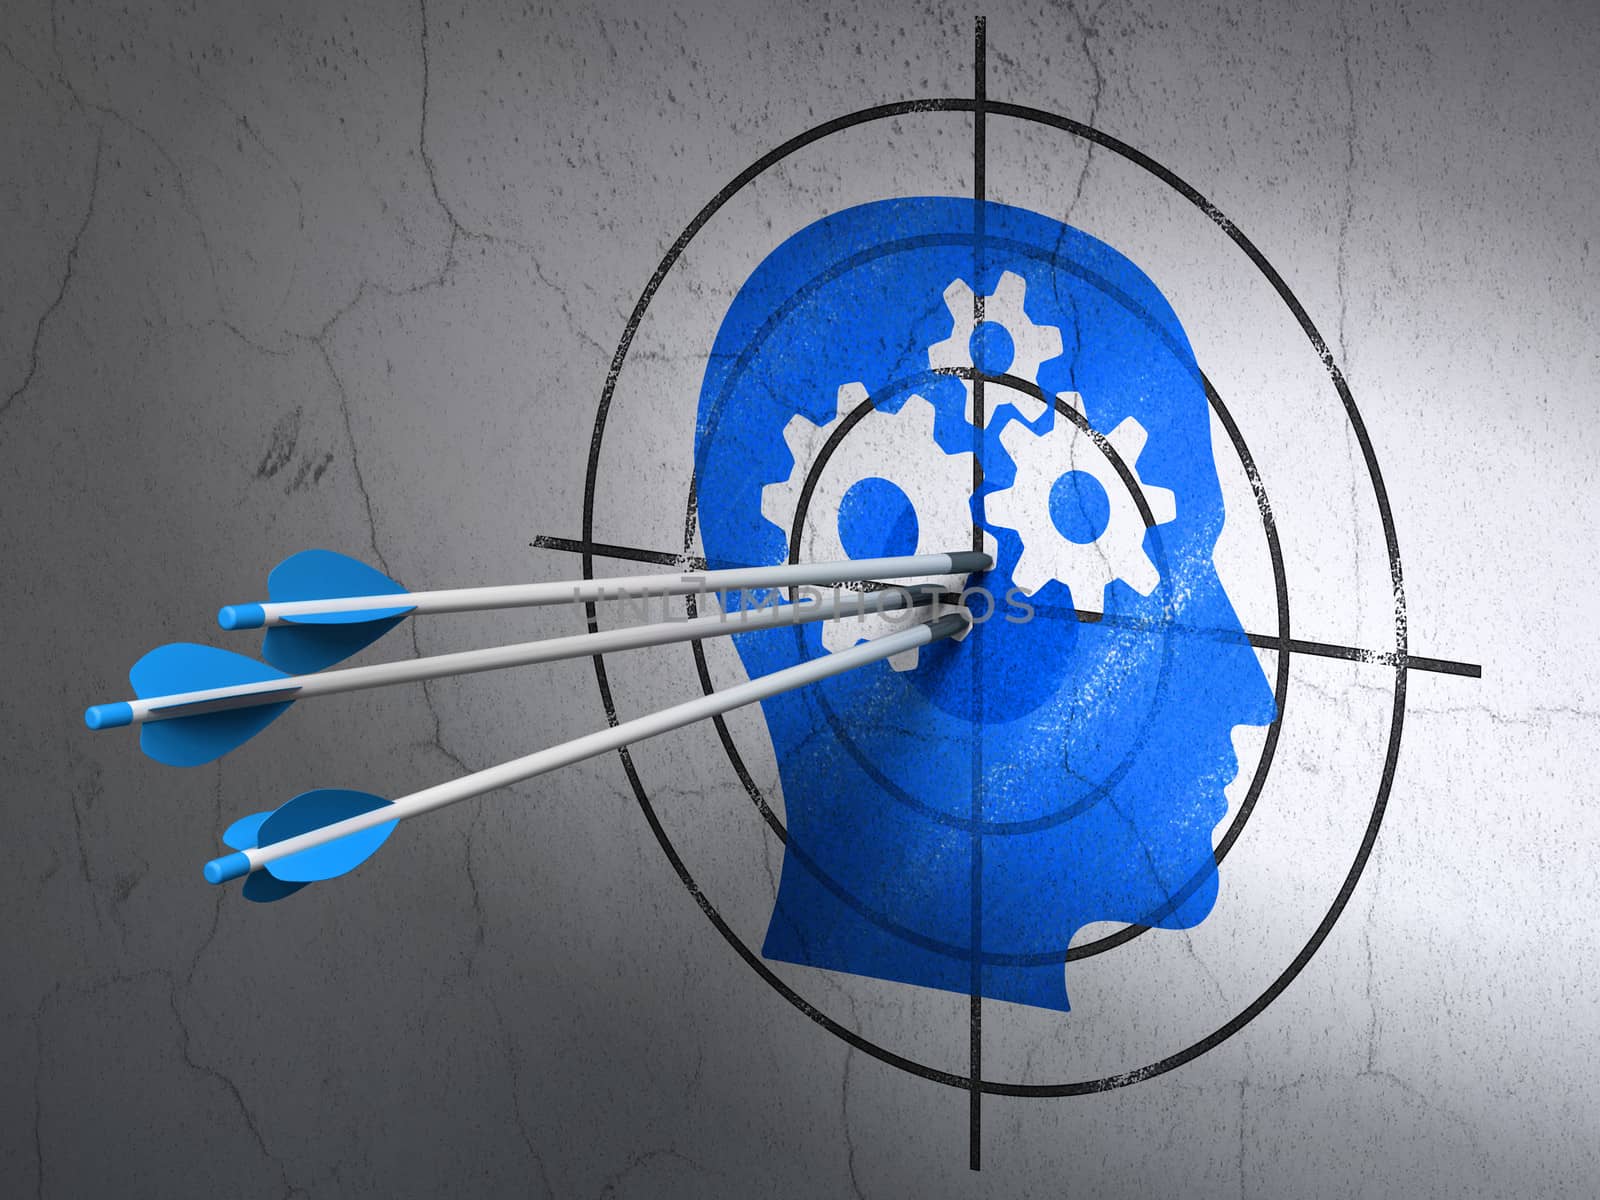 Success advertising concept: arrows hitting the center of Blue Head With Gears target on wall background, 3d render